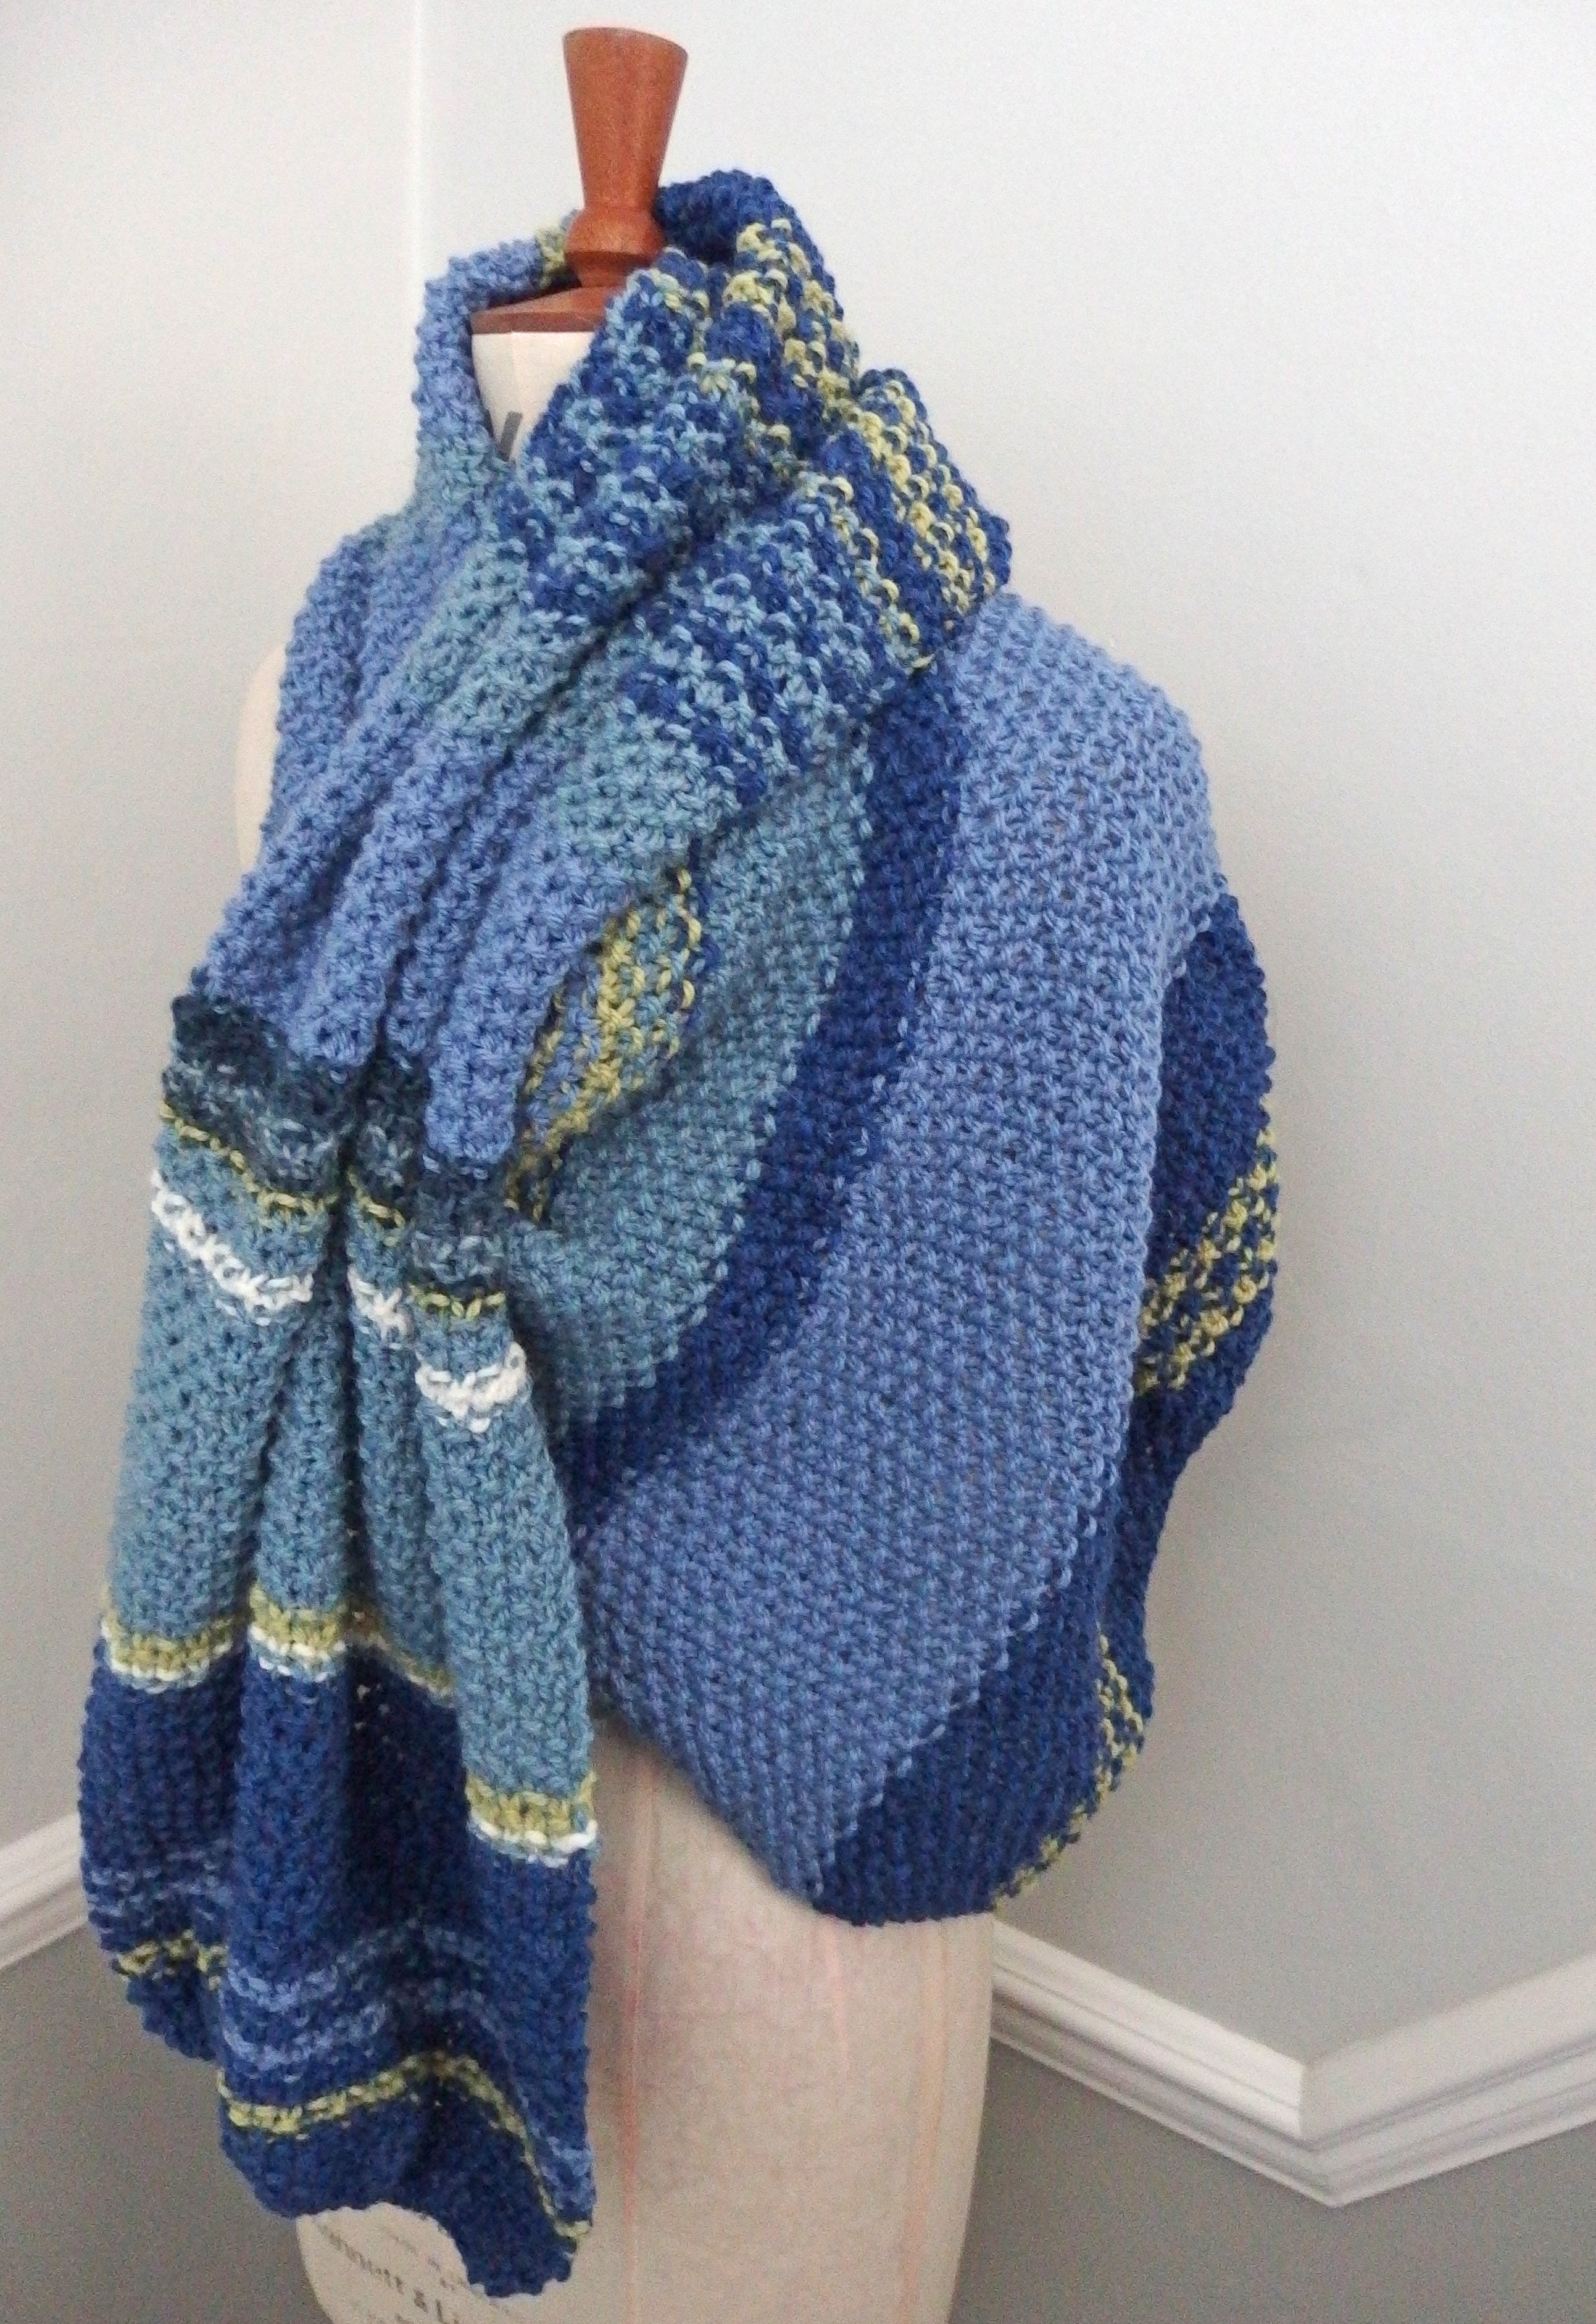 Scarf - Extraordinarily soft 100% Wool: Blue and Green Stripes